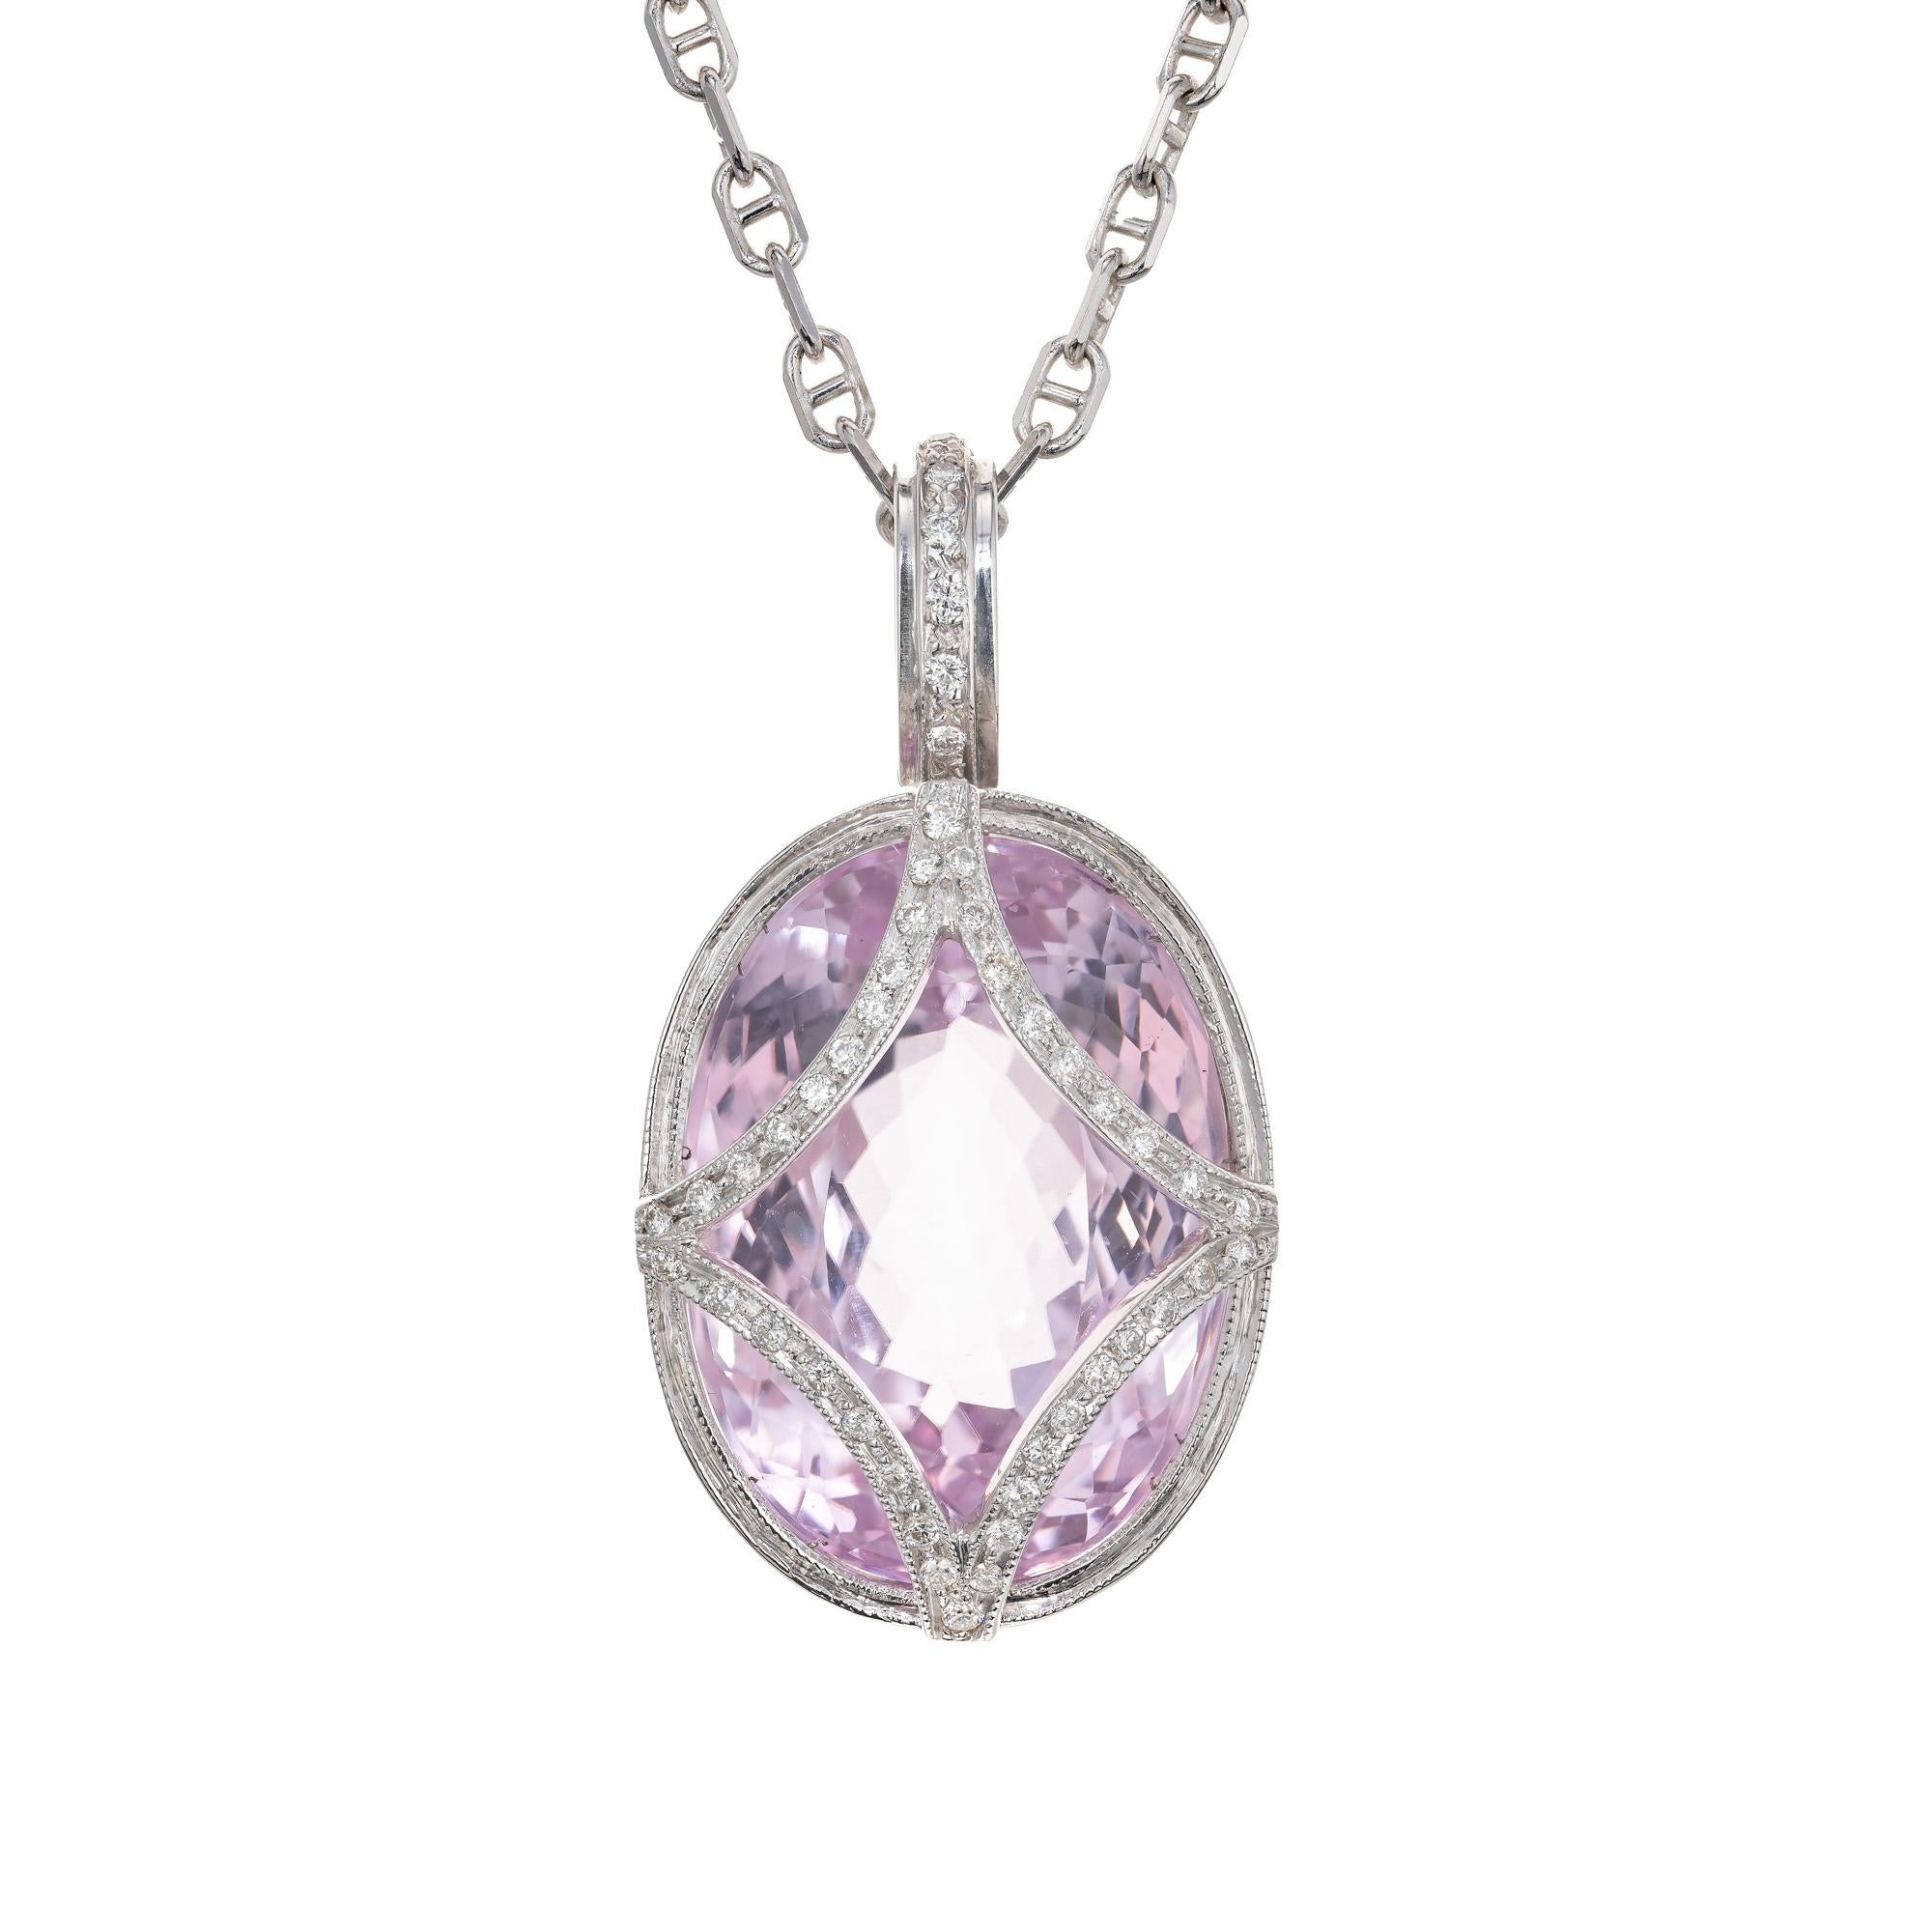 Bright pinkish purple kunzite and diamond pendant necklace. This unique pendant has a 21.69ct oval rich pink Kunzite set in a 14k white gold setting, accented with 57 round cut diamonds along the bail and front of stone. An 18 Inch 14k white gold